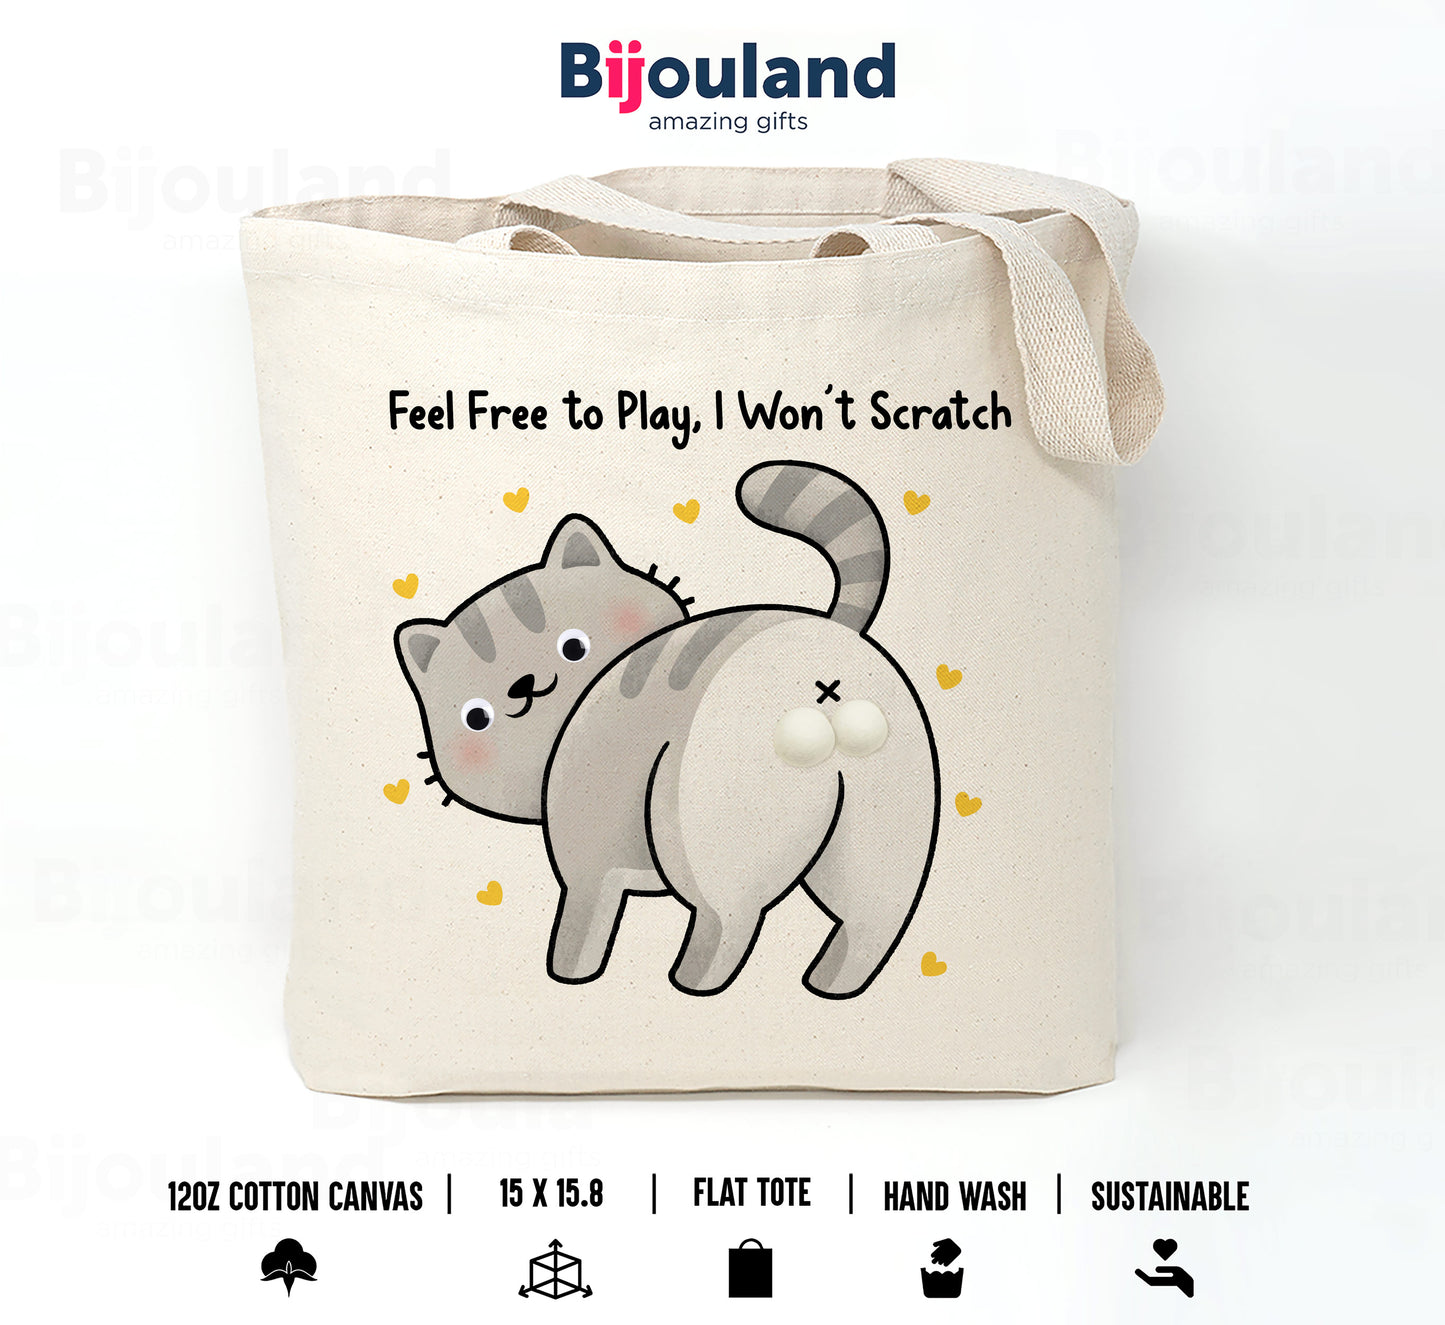 Feel Free to Play, I Won't Scratch - Funny Cat Tote Bag with playful balls, Cotton Canvas, 15 x 16 inches